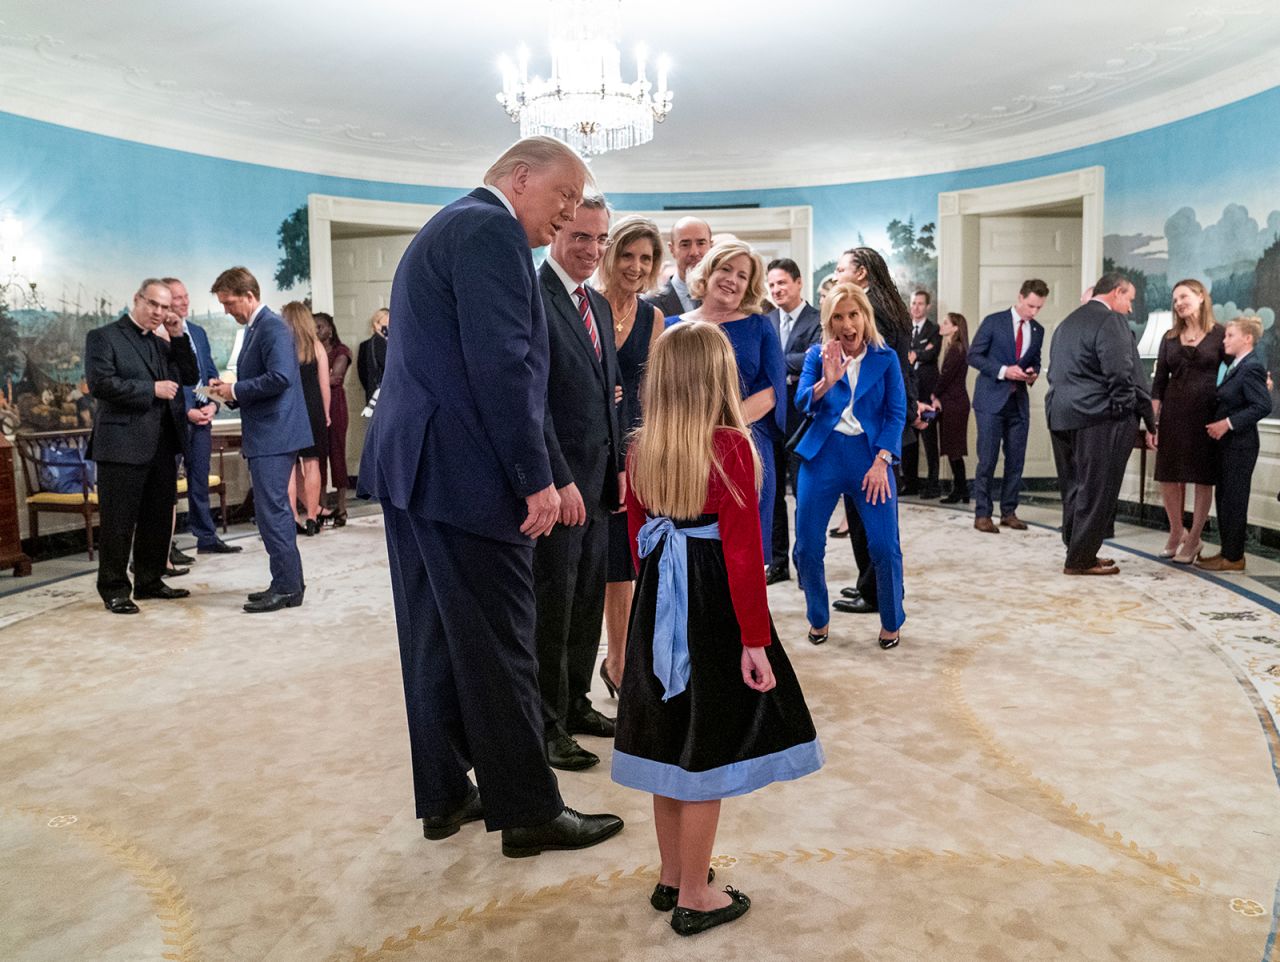 One of Barrett's daughters has several people's attention, including the President's, during the White House reception. On the left side of the photo, looking down in the blue suit, is Nebraska Sen. Ben Sasse, who tested negative for the virus, according to his office. Former New Jersey Gov. Chris Christie, who like the Trumps has tested positive, is seen at right talking to Barrett. <em>CORRECTION: </em><em>This caption has been updated to correctly state that Sen. Ben Sasse tested negative for coronavirus.</em>